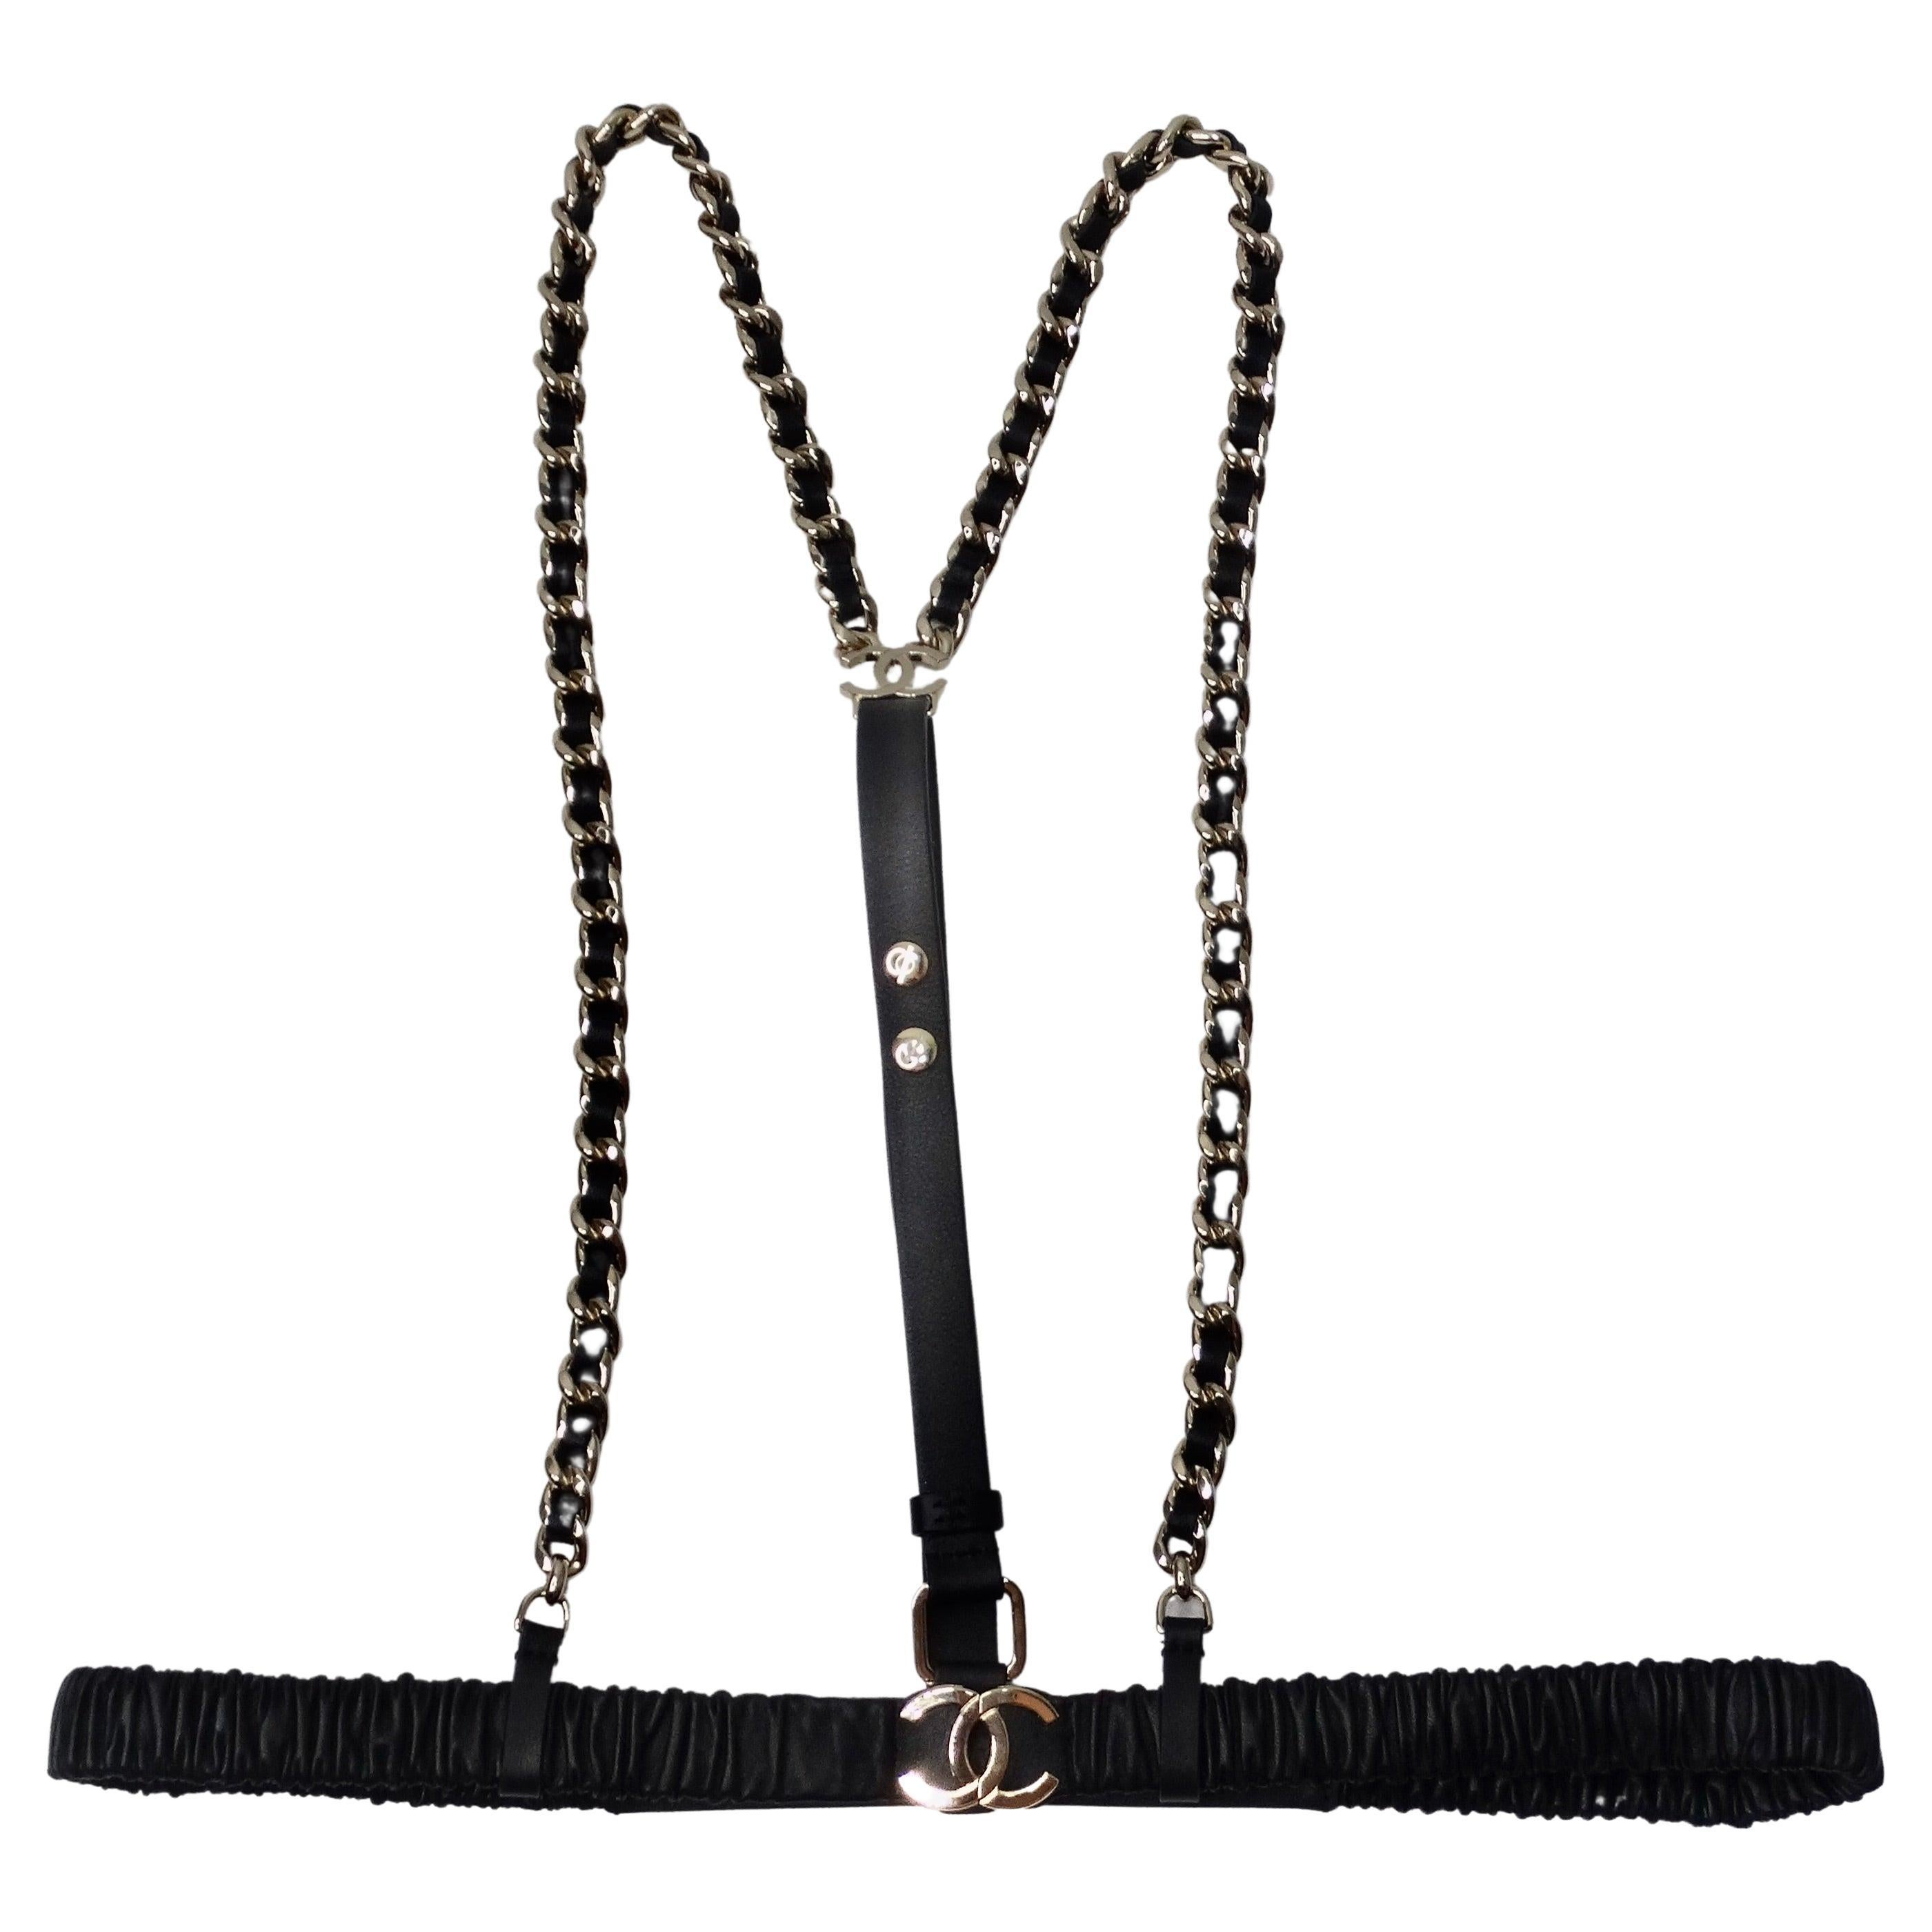 Chanel Harness, automne-hiver 2021/2022